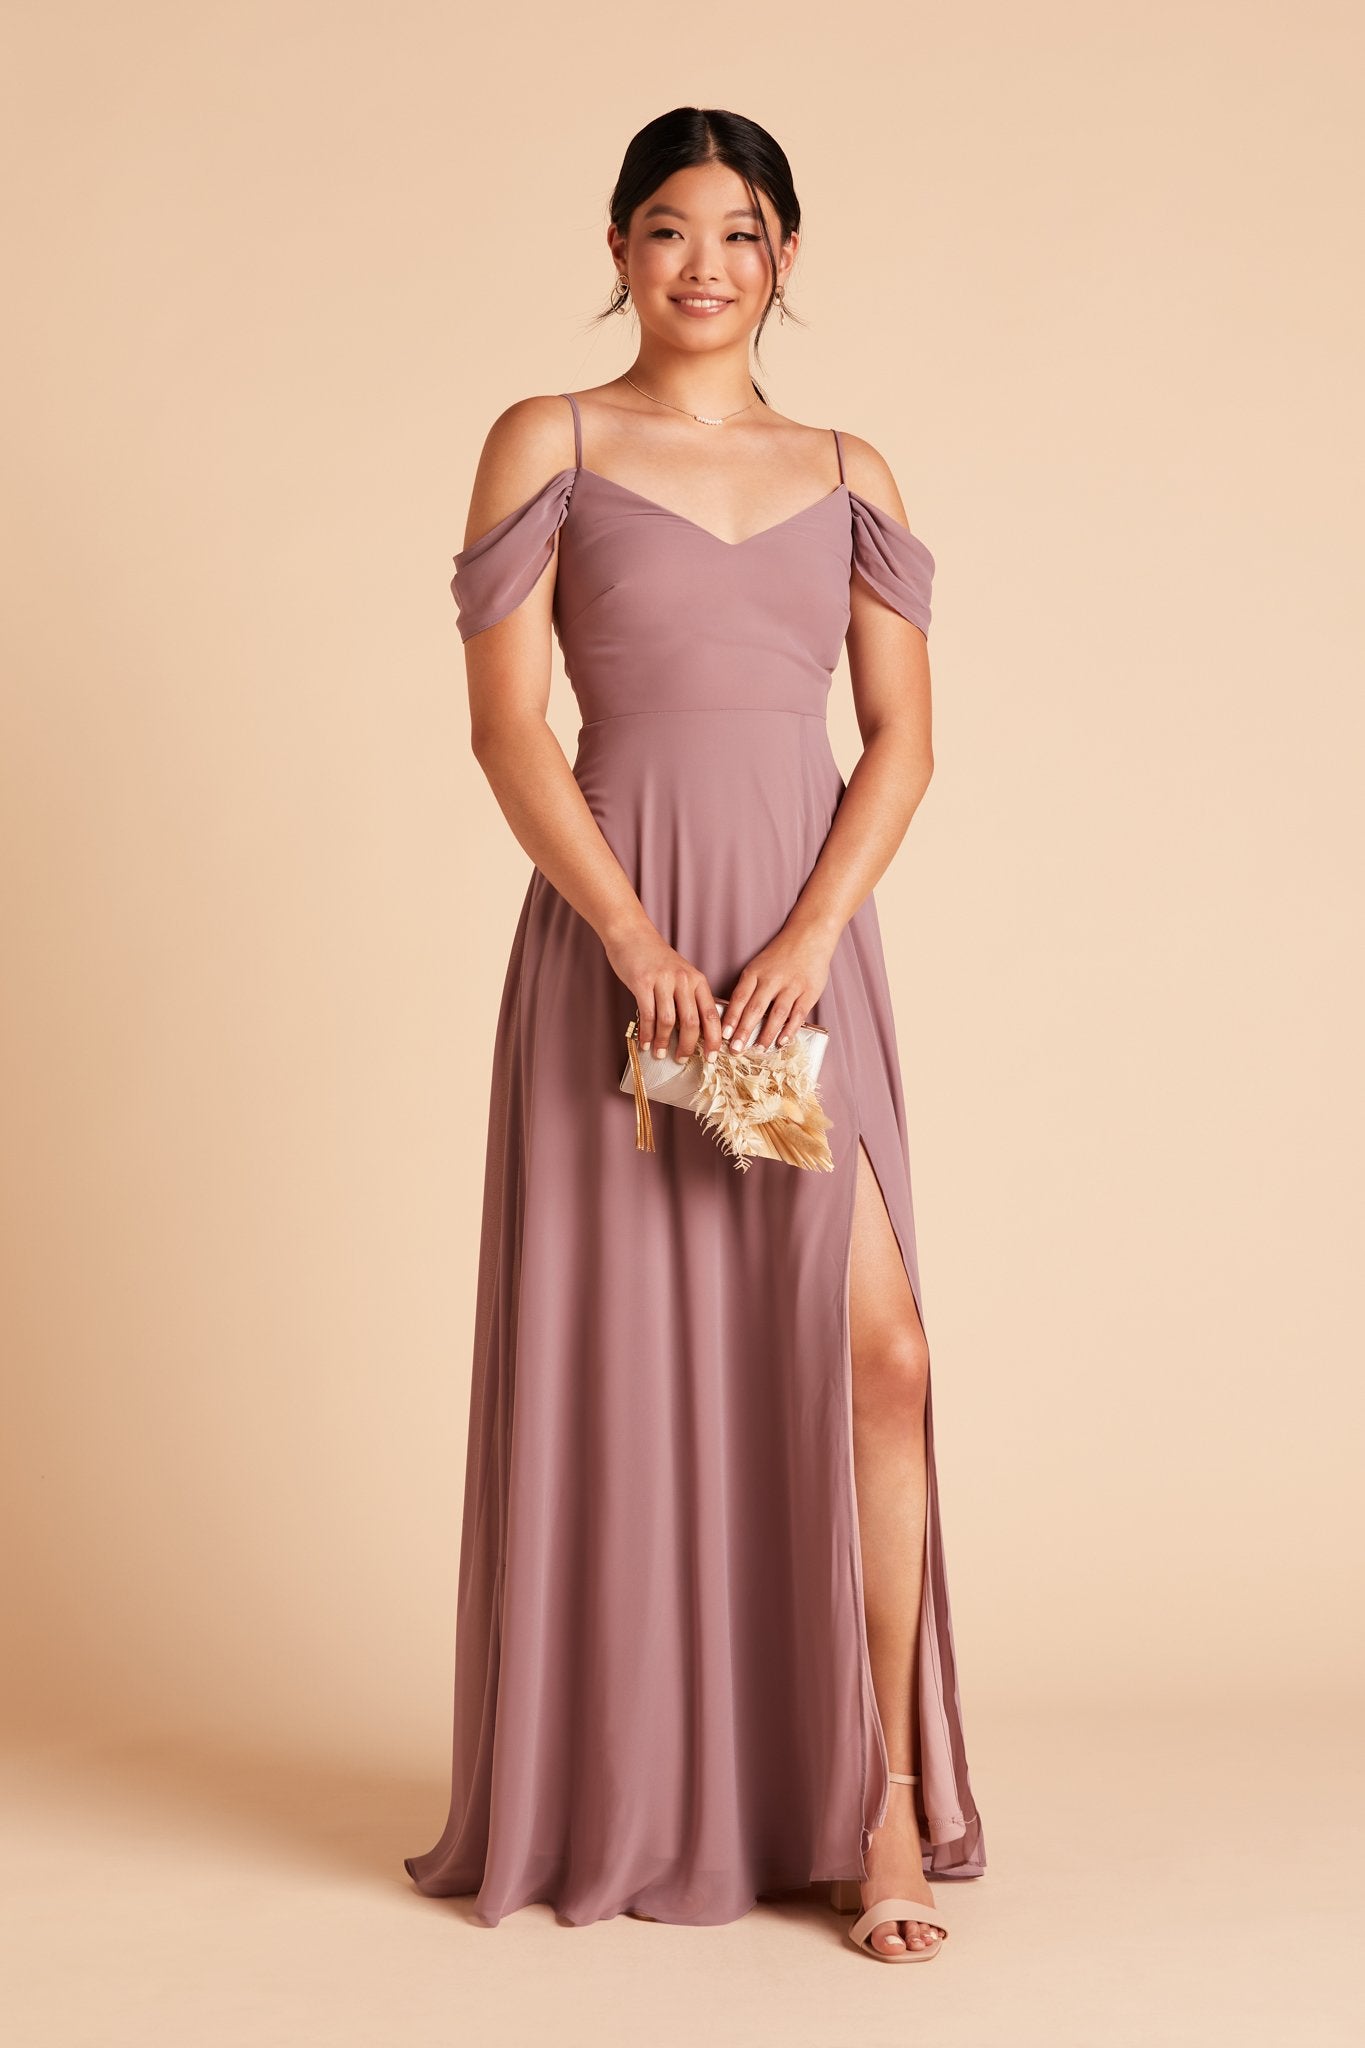 Devin convertible bridesmaid dress with slit in dark mauve chiffon by Birdy Grey, front view